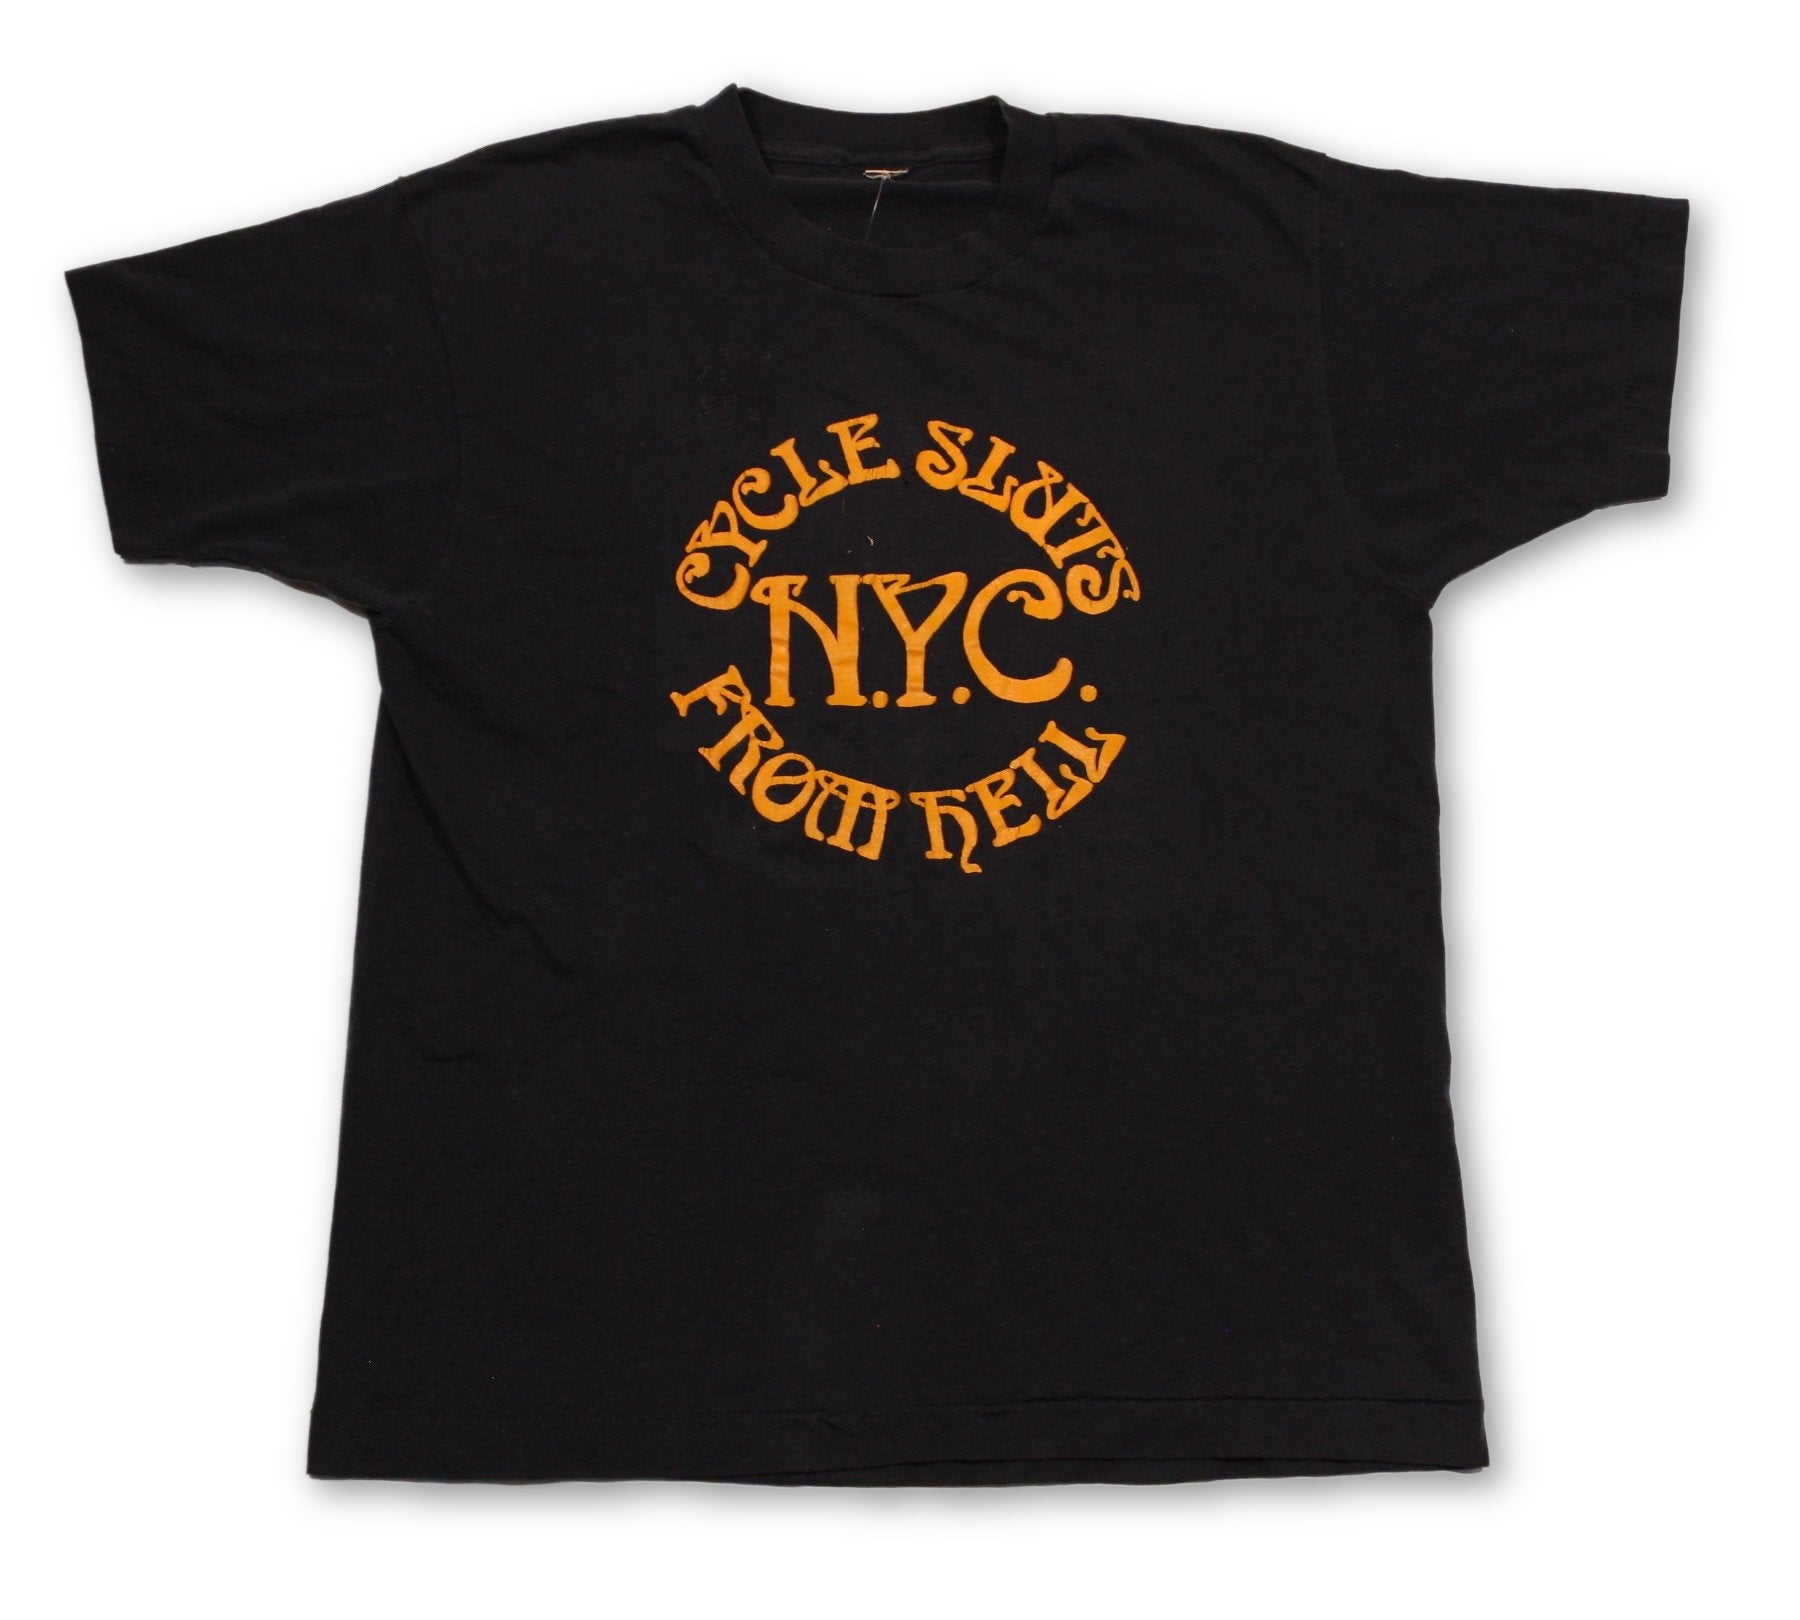 Vintage Cycle Sluts From Hell "NYC" T-Shirt - jointcustodydc